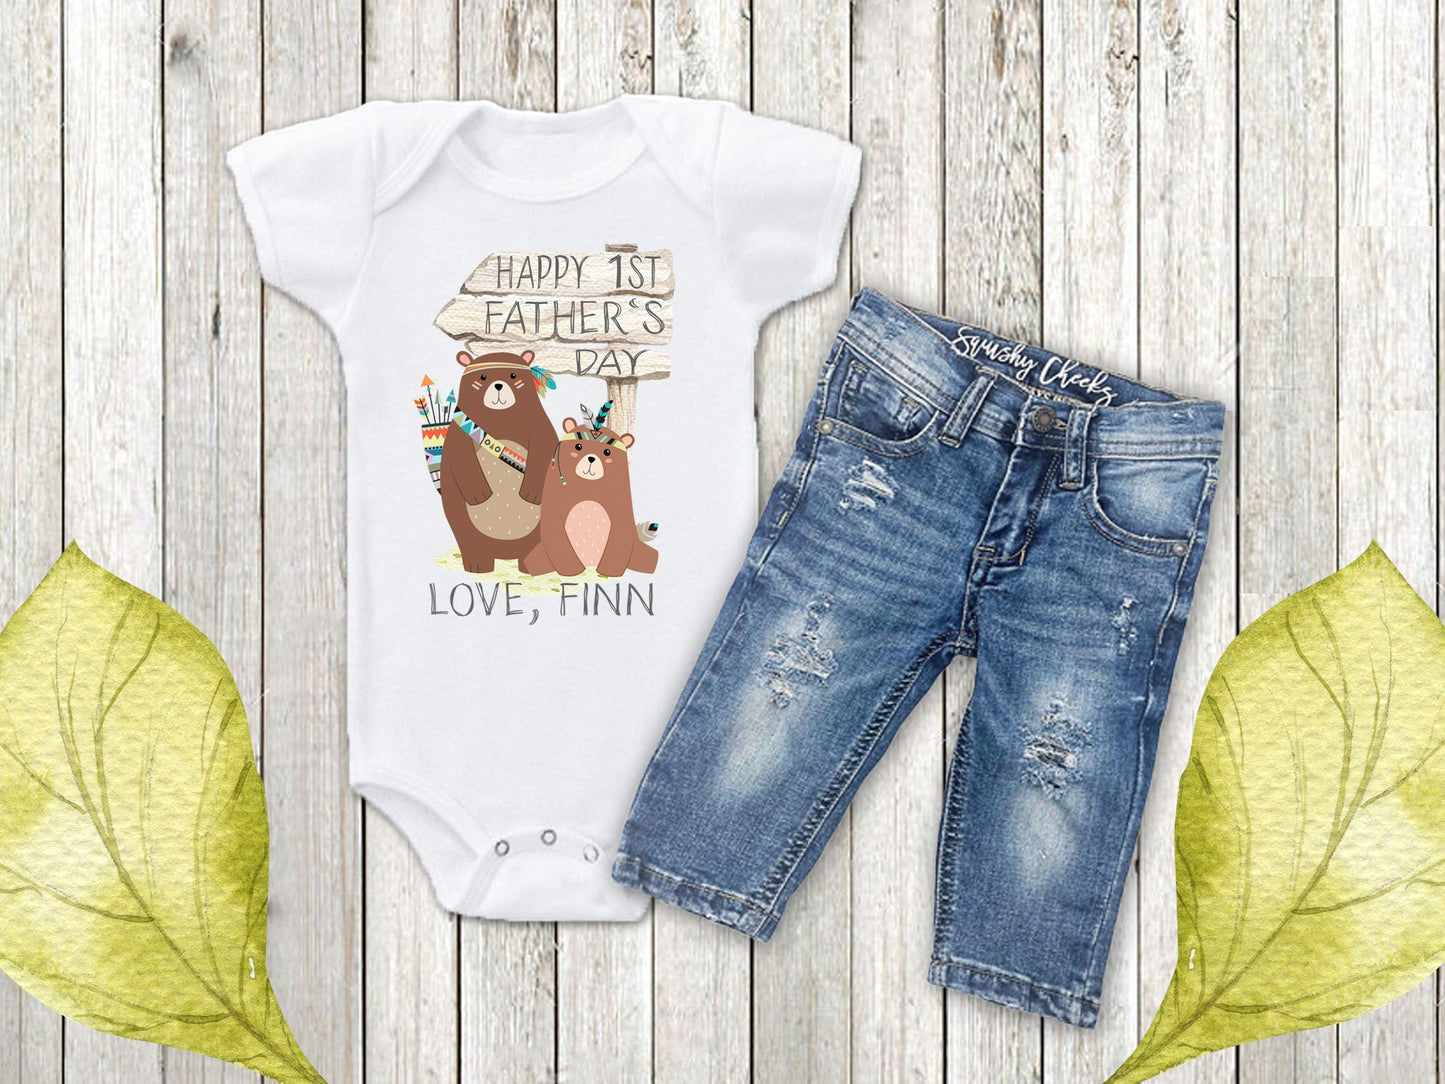 Boy's Personalized 1st Father's Day Top - Squishy Cheeks